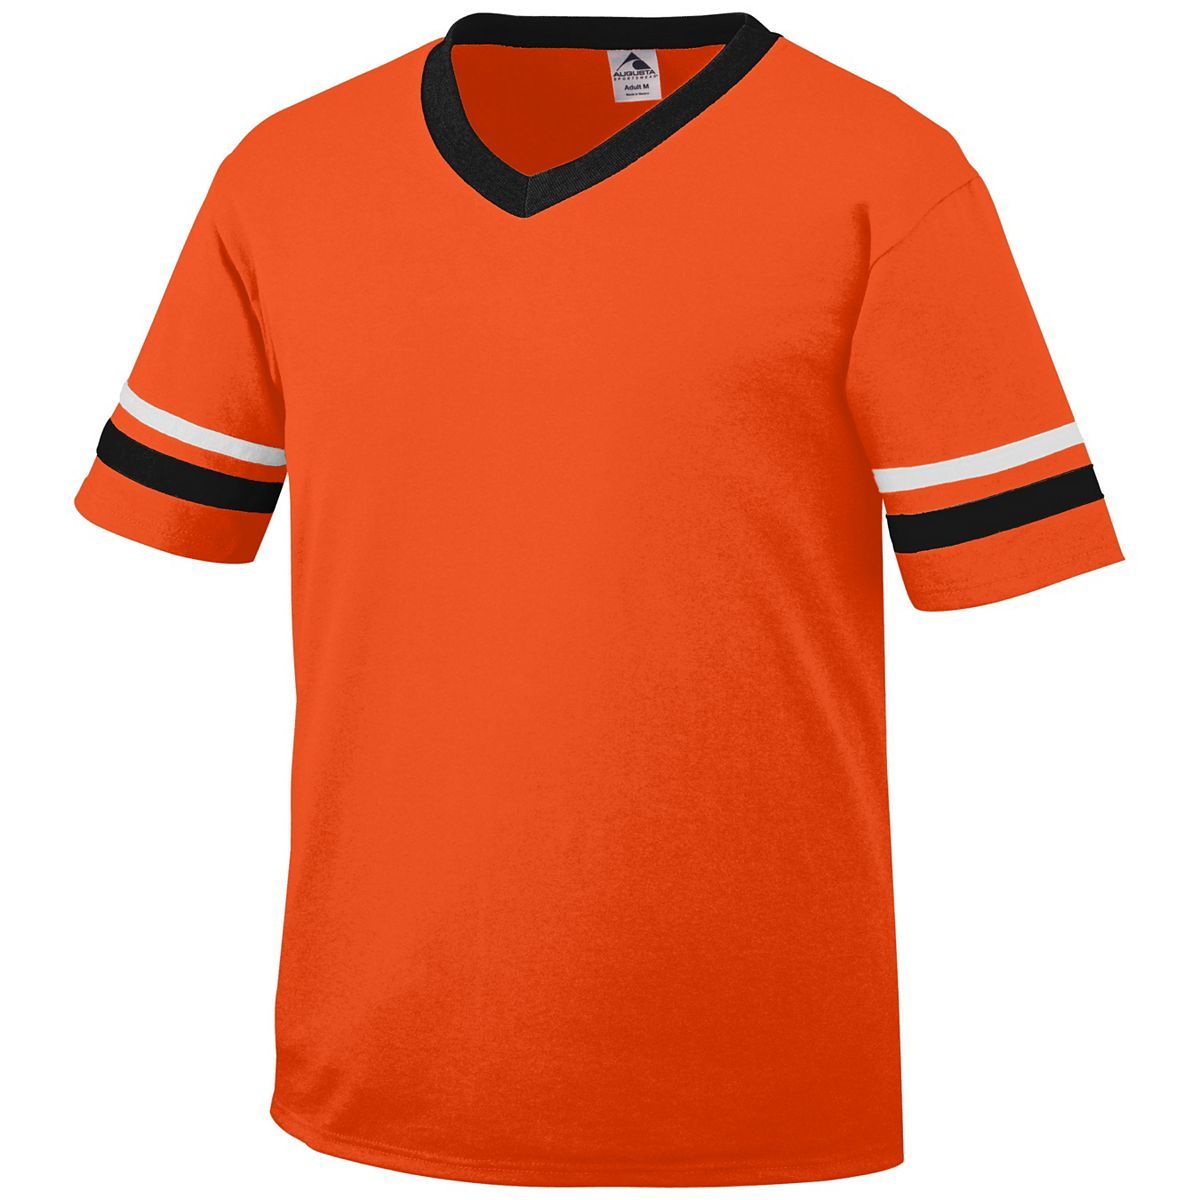 Augusta Sportswear Youth Sleeve Stripe Jersey in Orange/Black/White  -Part of the Youth, Youth-Jersey, Augusta-Products, Shirts product lines at KanaleyCreations.com